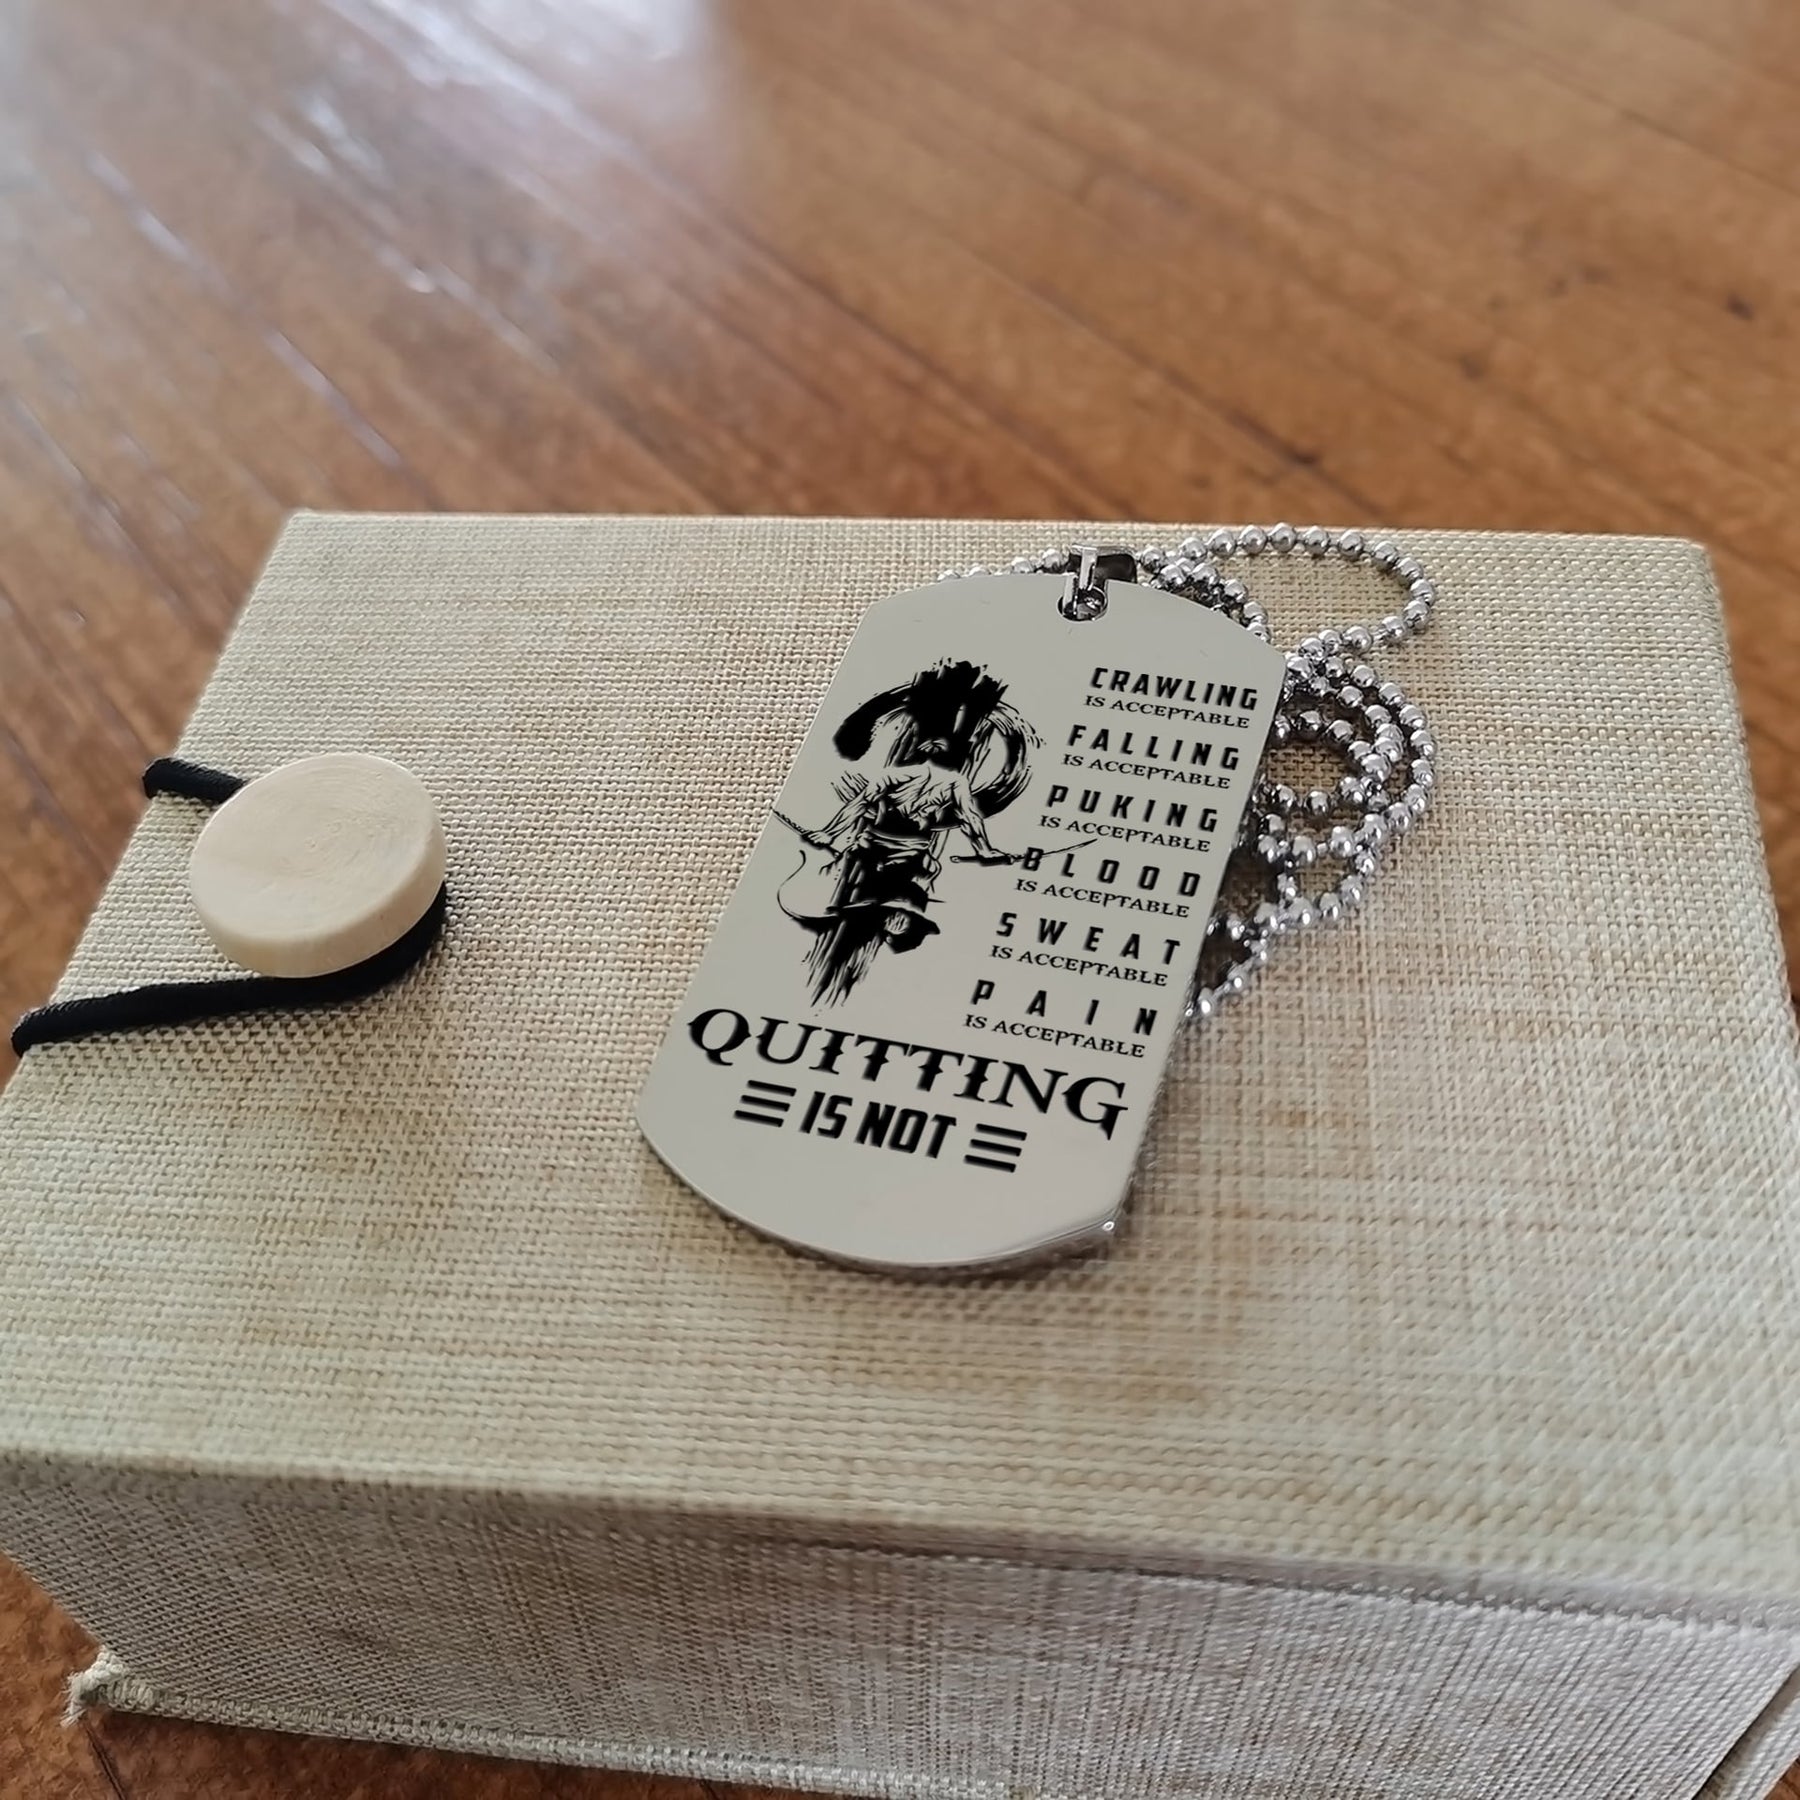 SAD005 - Quitting Is Not - Samurai - Engrave Silver Dog Tag